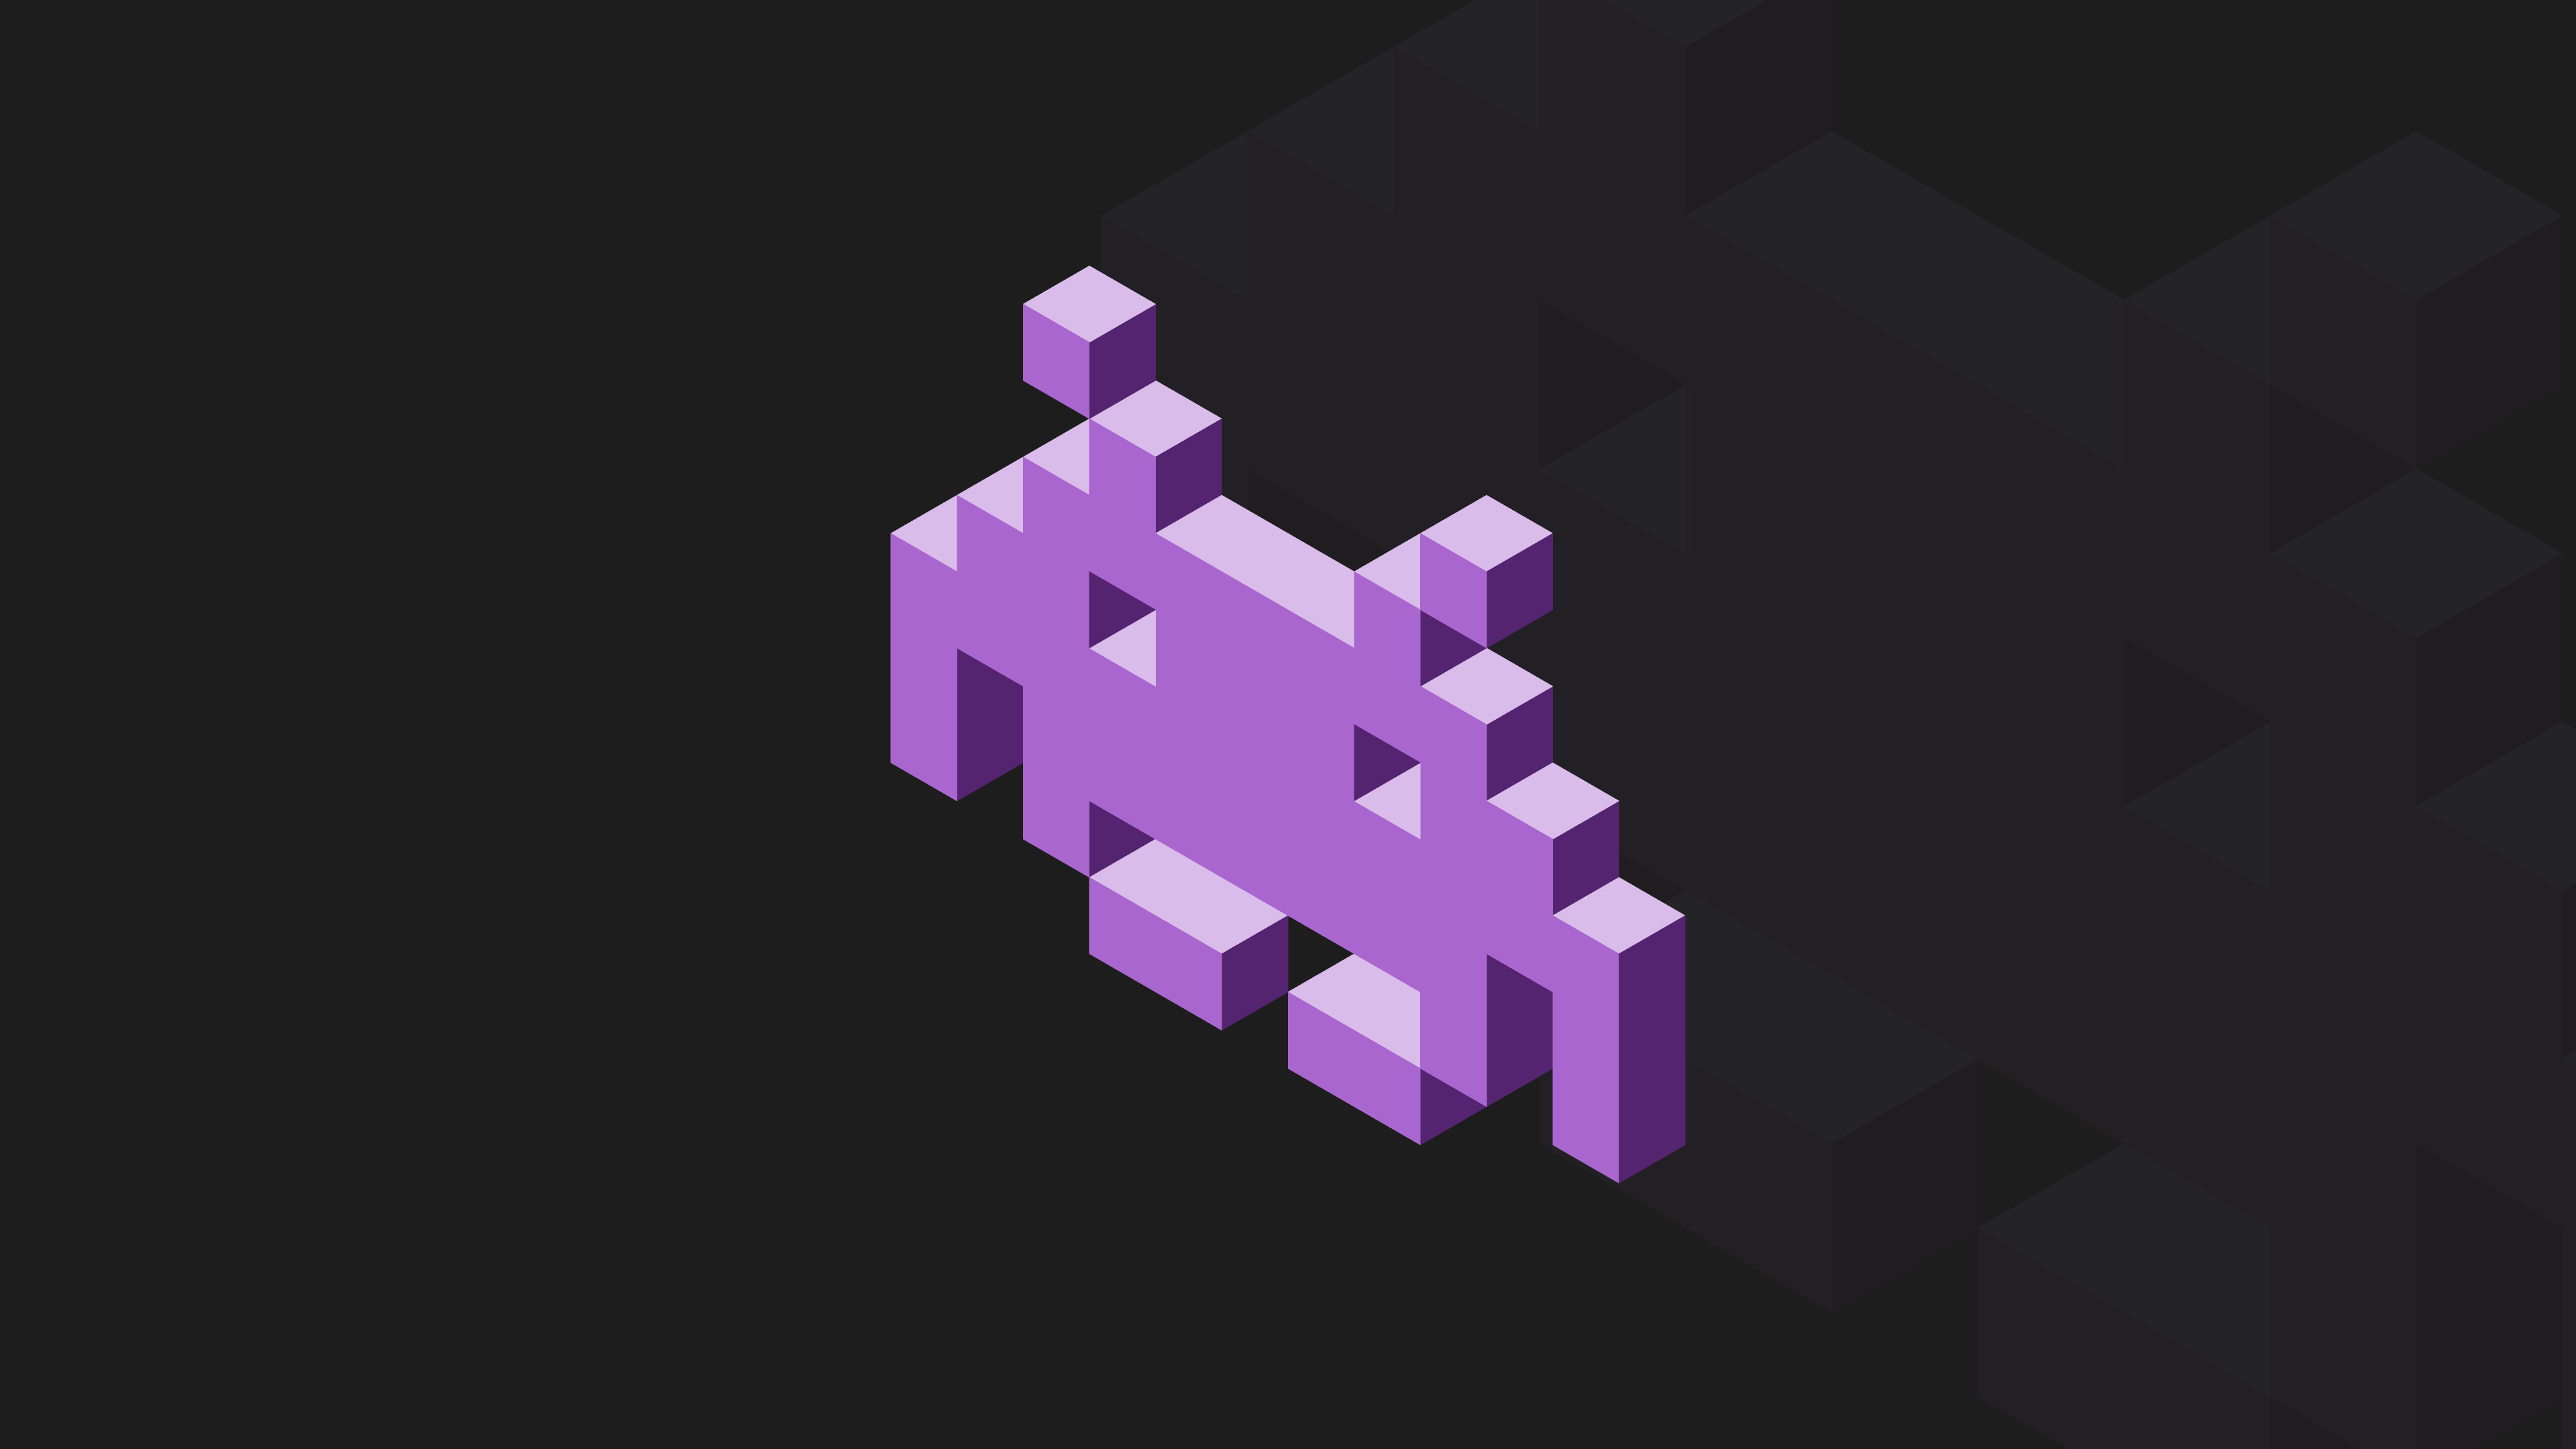 3840x2160 ... Space Invaders Wallpaper [4k] by ThePi7on